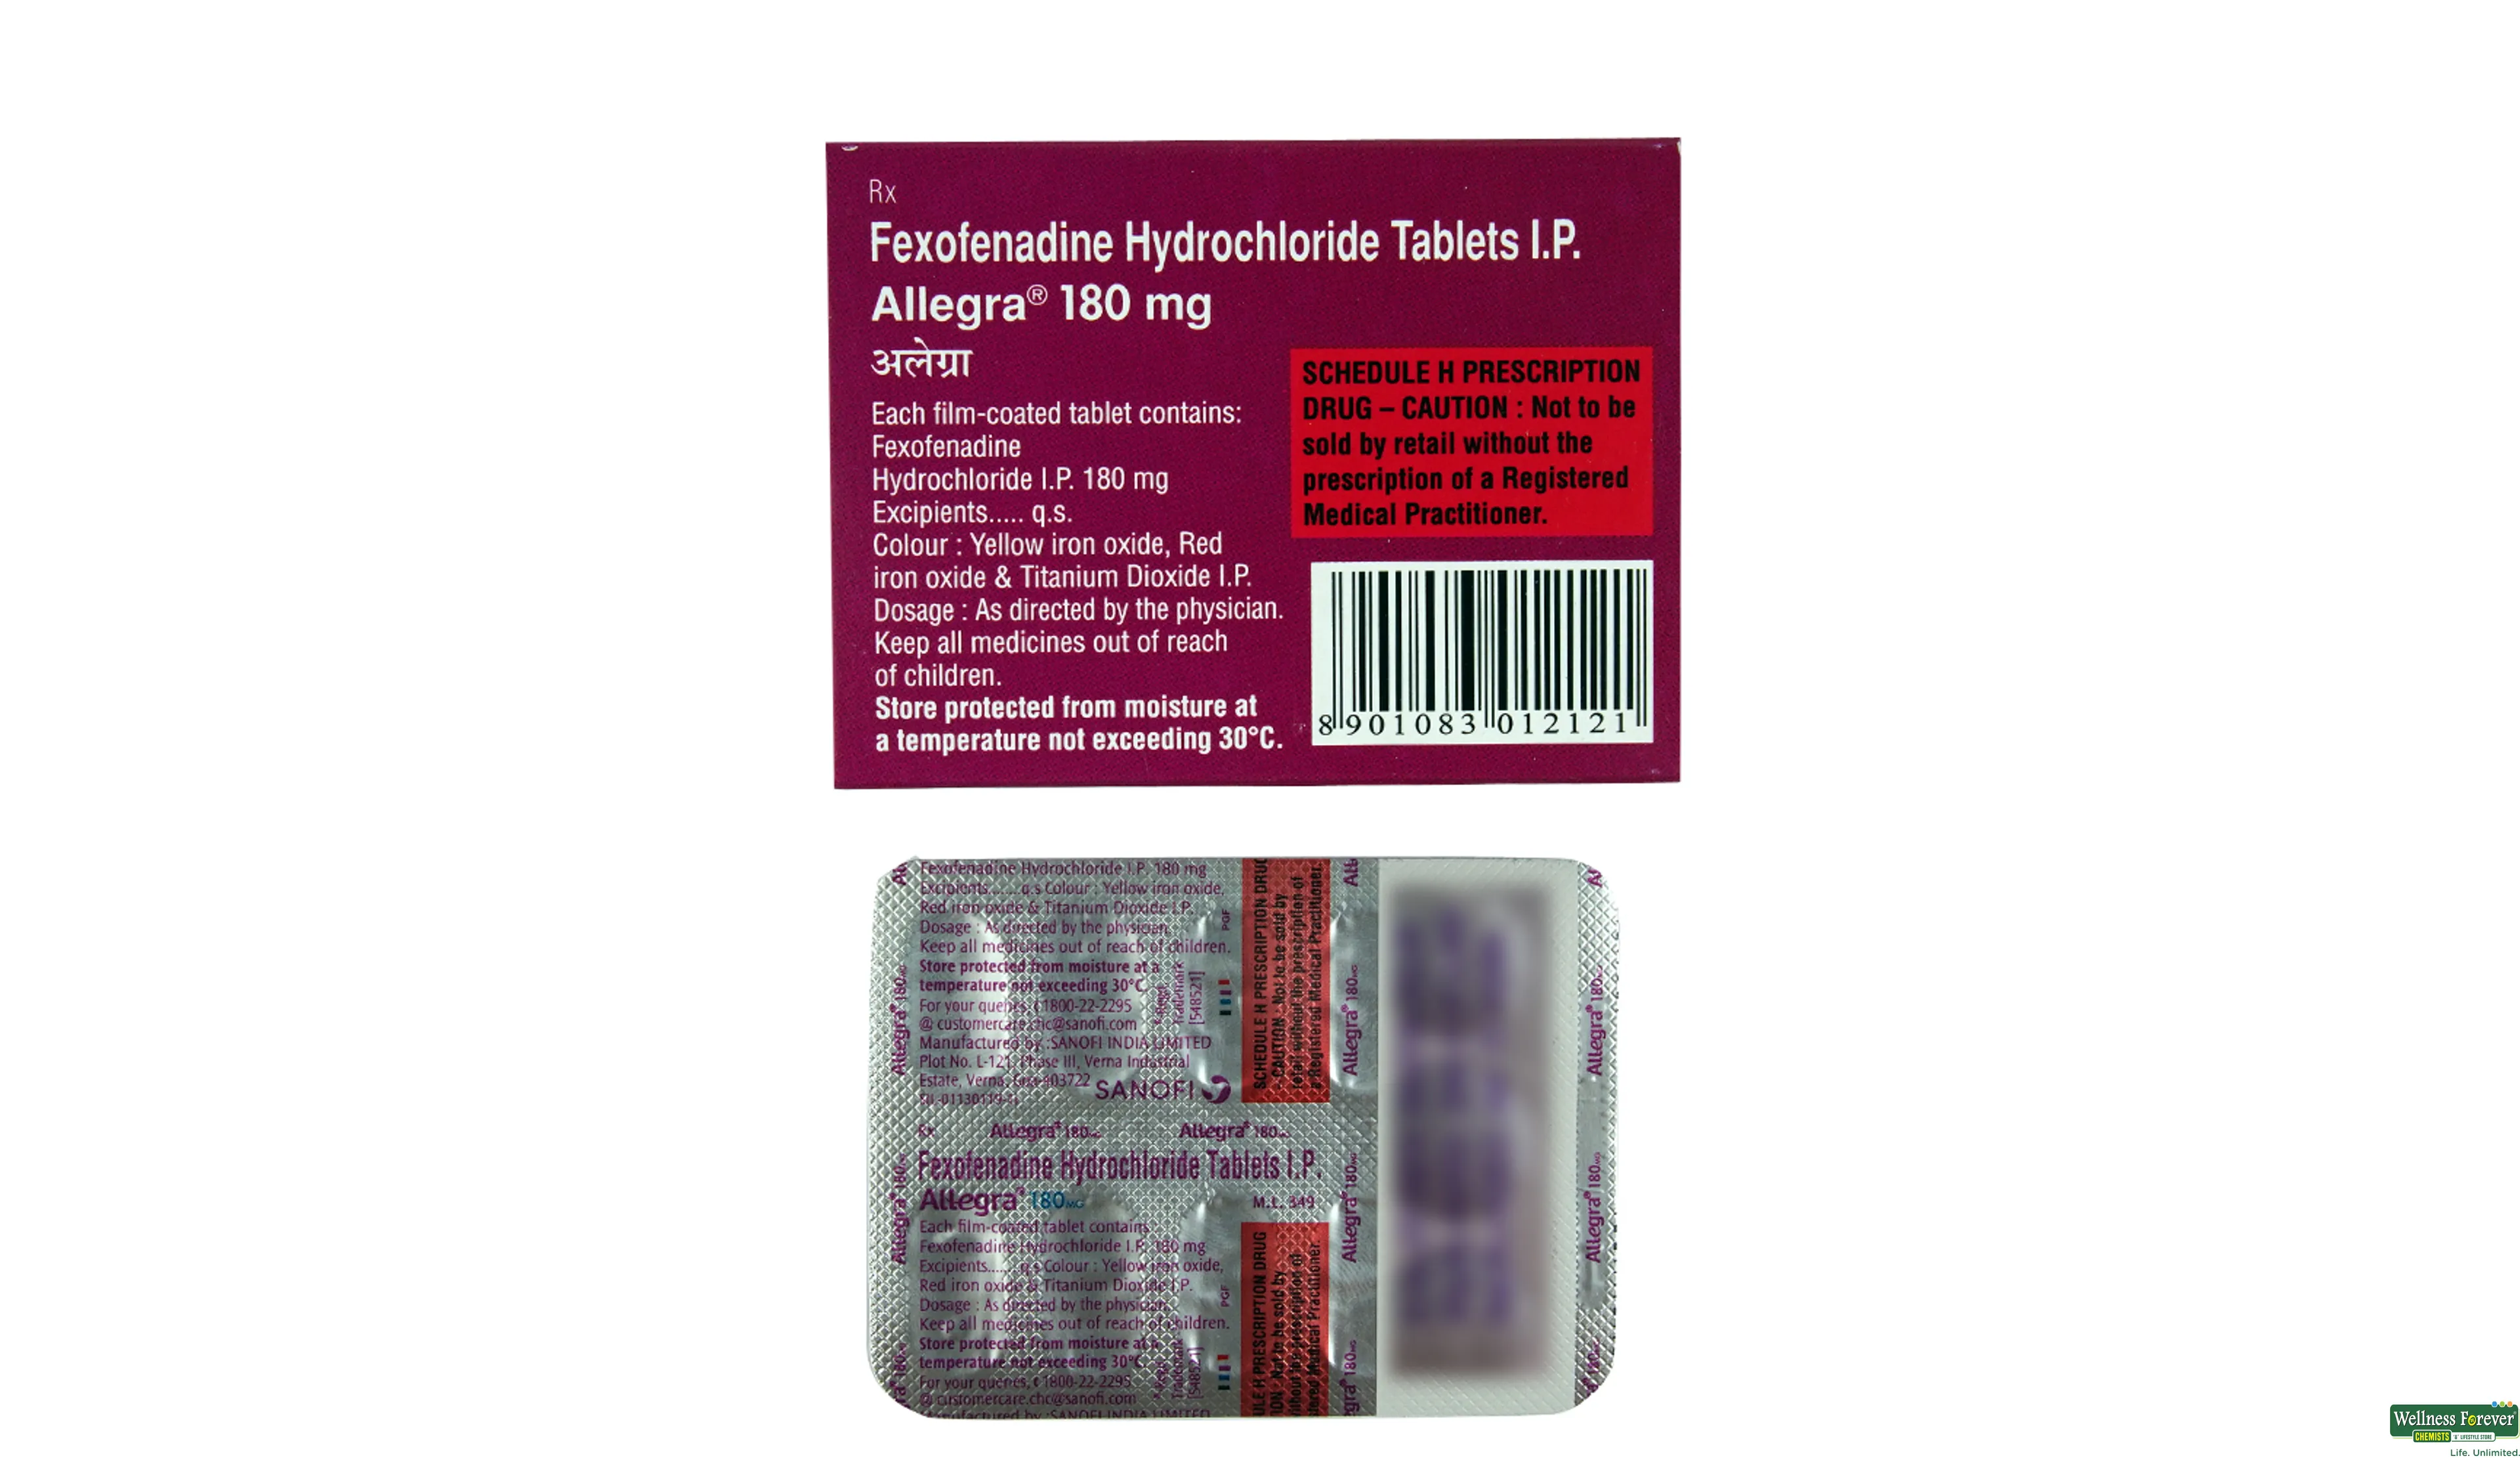 ALLEGRA 180MG 10TAB- 2, 10TAB, •Quick Symptom Relief: Acts fast to calm sneezing, itchy eyes, and other common allergy discomforts.

•Won’t Make You Sleepy: You can stay alert and active without the drowsiness other allergy pills might cause.

•Once Daily Dosing: Just one tablet each day is enough to keep symptoms at bay.